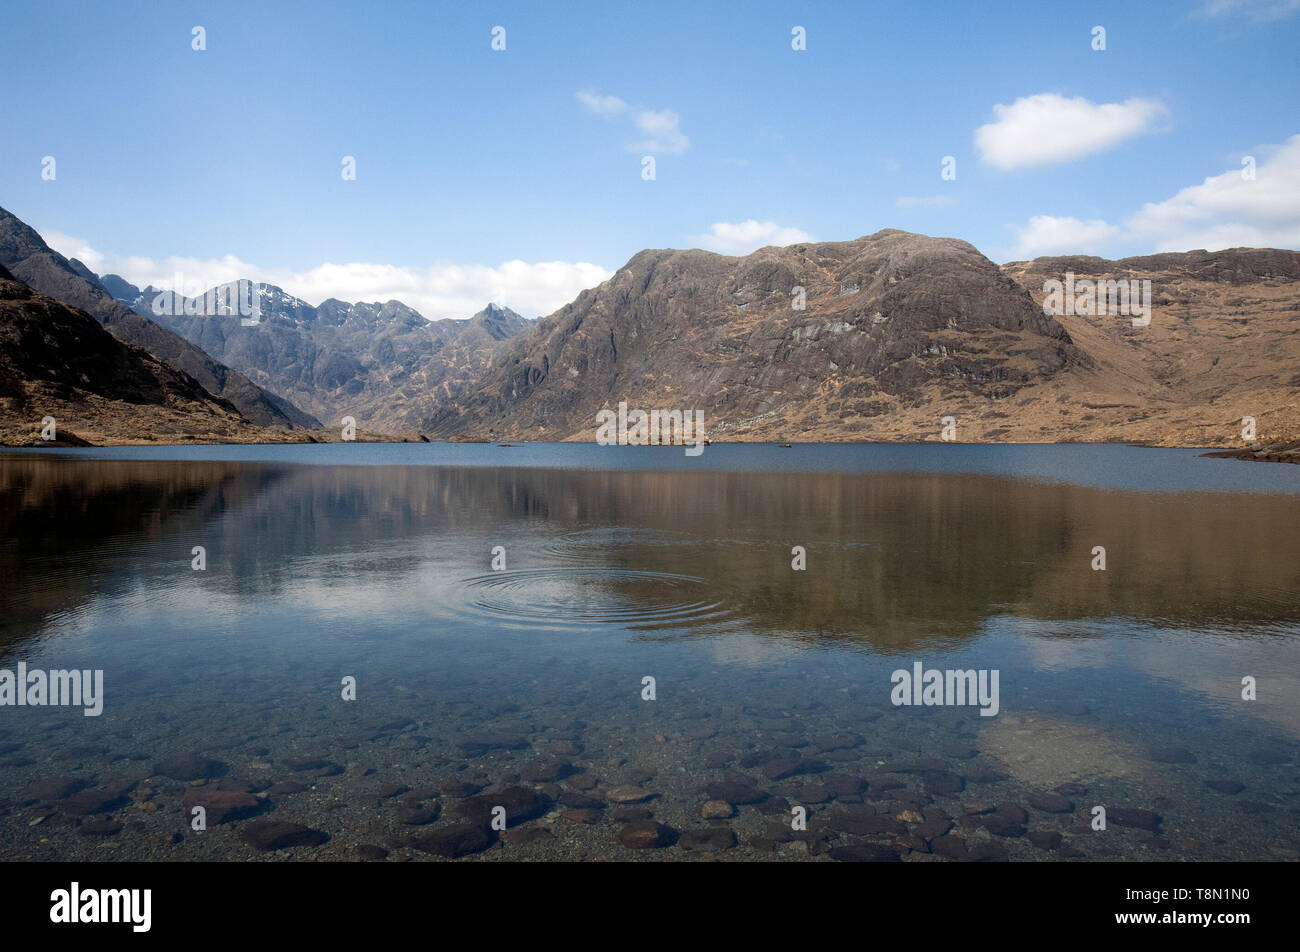 Remote Loch Coruisk reflecting back the Black Cullin mountain range on the Isle of Skye in the Scottish Highlands. Accessed by boat from Elgol. Stock Photo